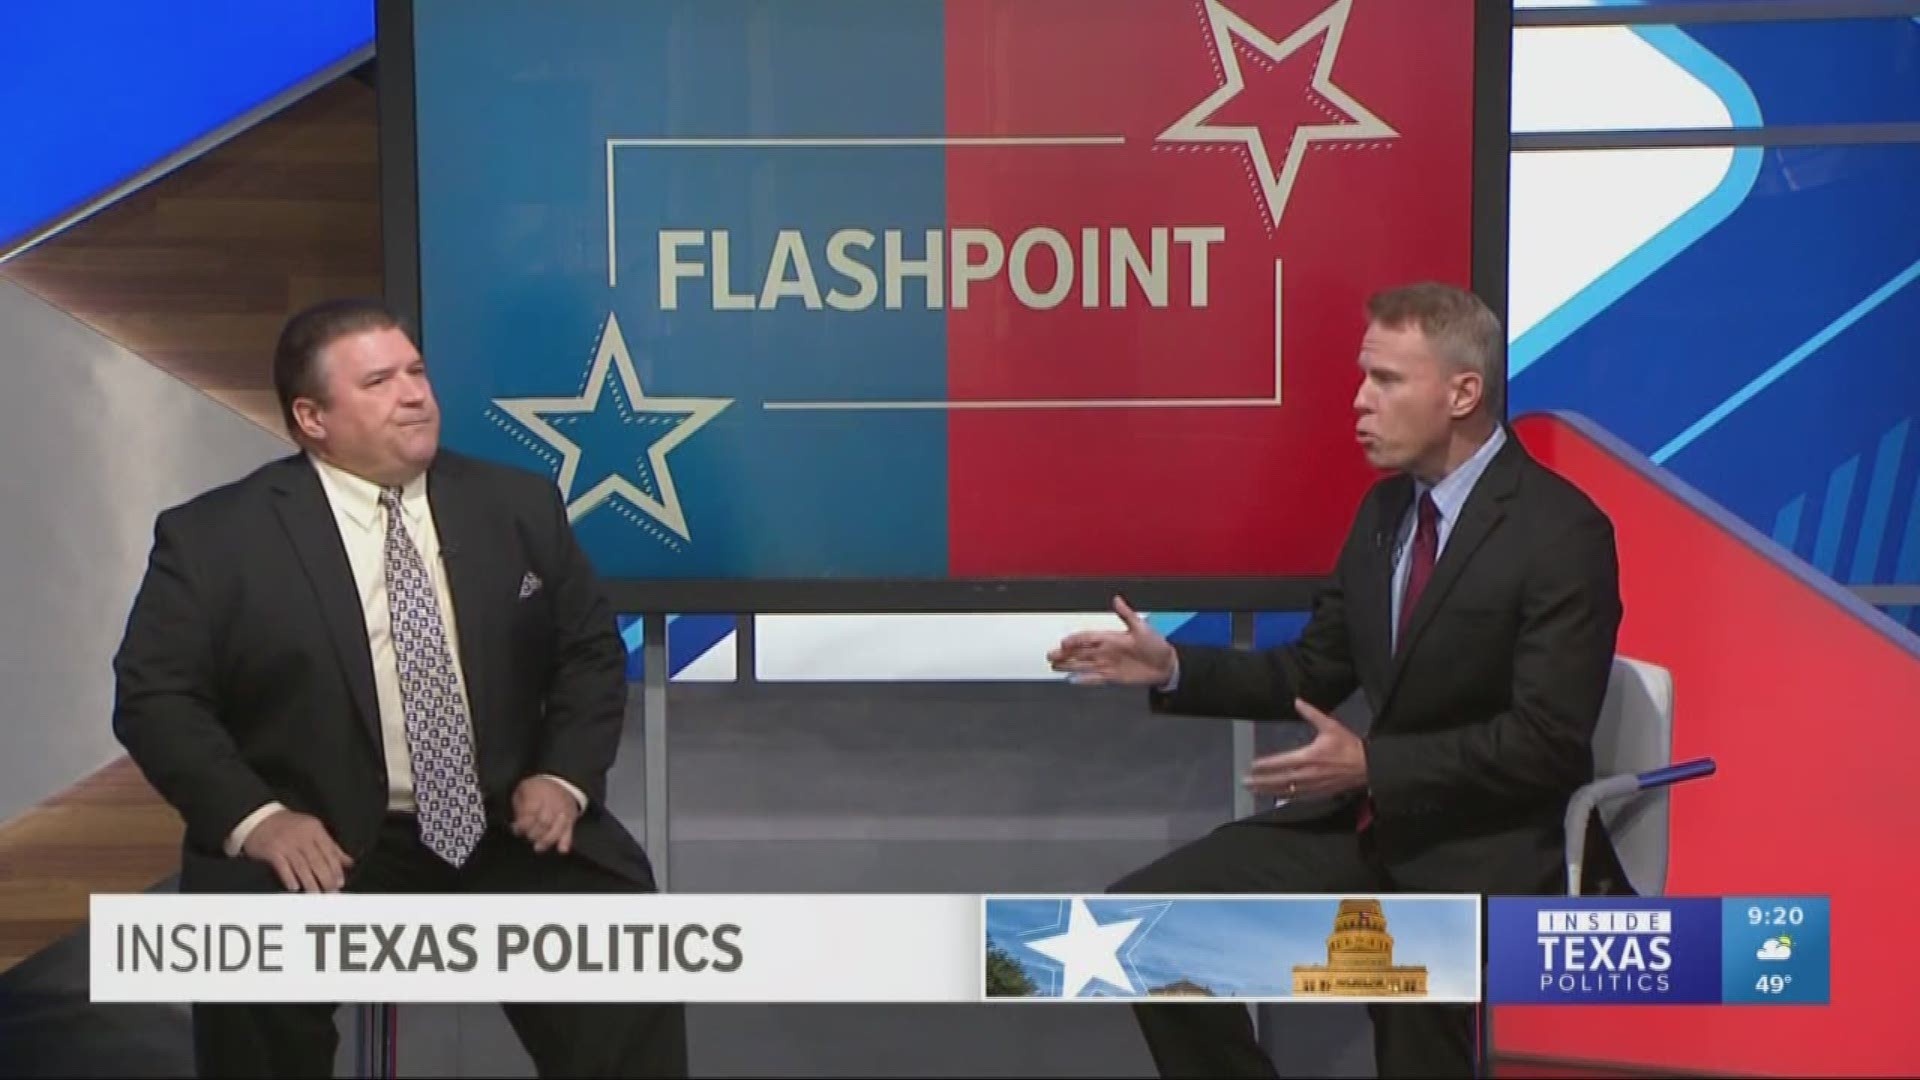 This week's Flashpoint features Wade Emmert, former chairman of the Dallas County Republican Party, and Rich Hancock, from VirtualNewsCenter.com.